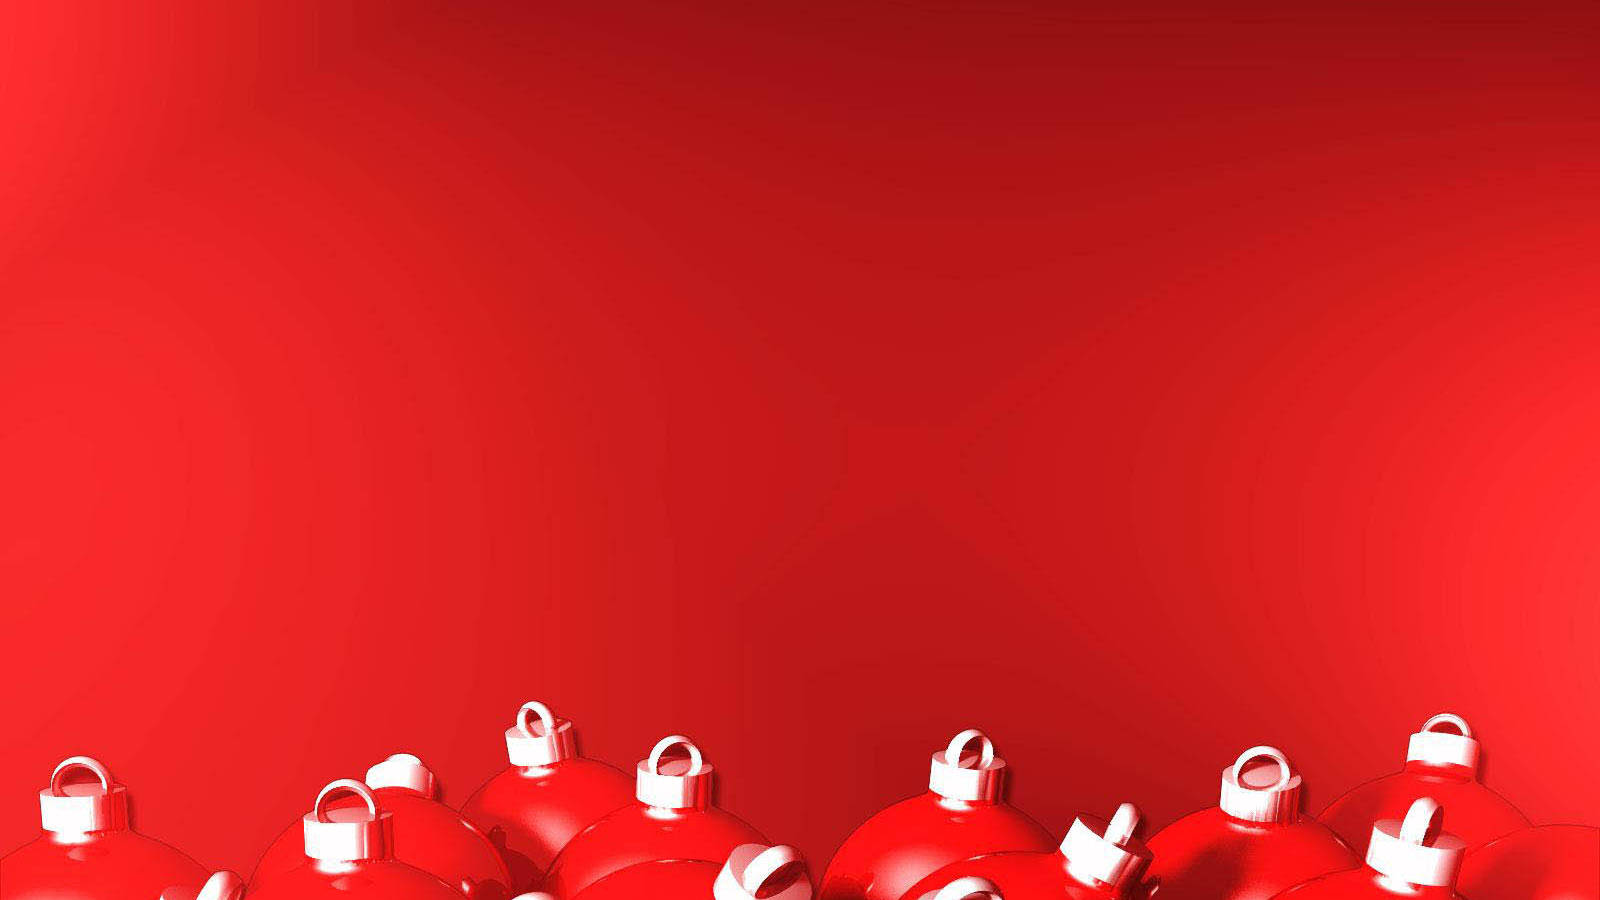 Festive Glistening Christmas Ornaments On A Regal Red Background Wallpaper